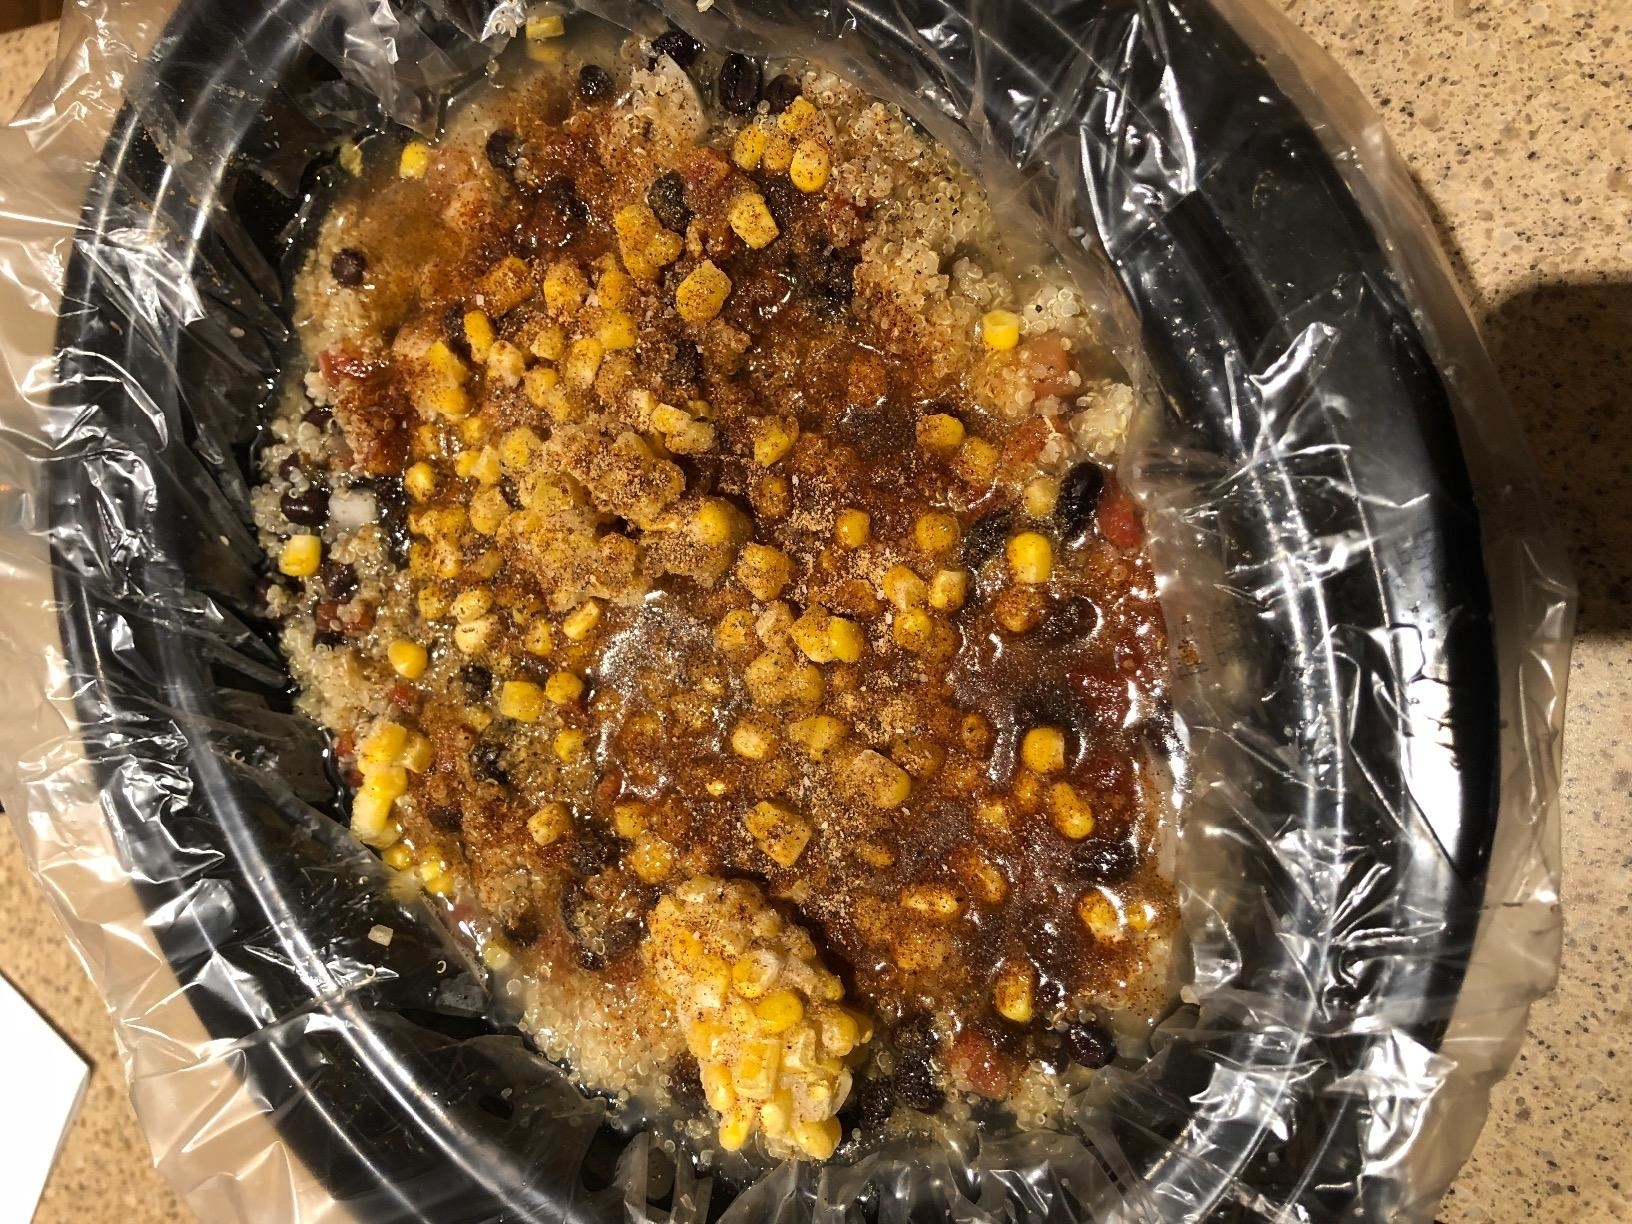 Reviewer image of the liner inside the crock pot filled with food